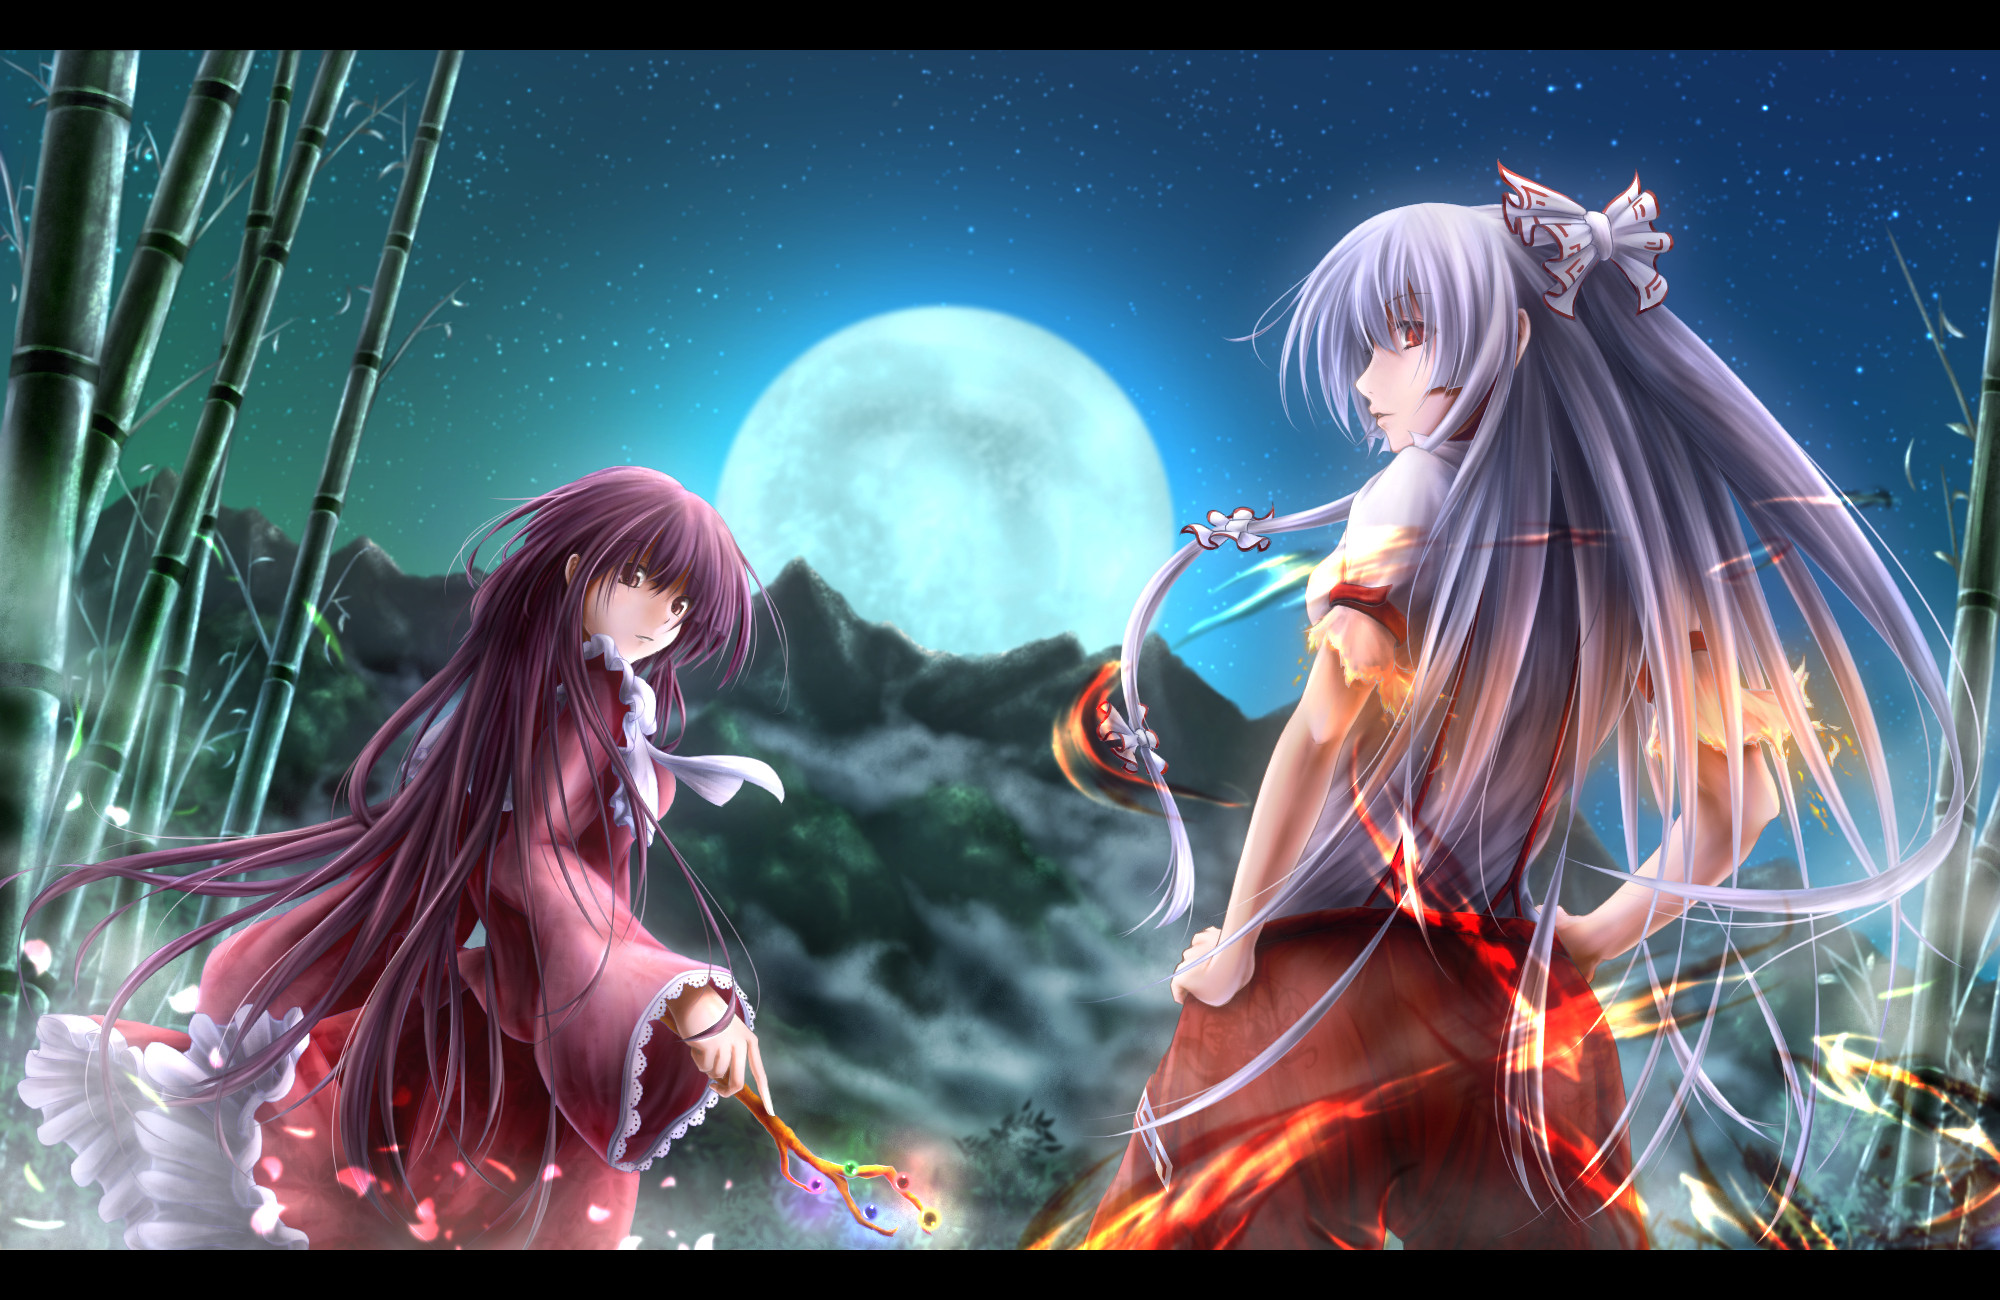 125 Touhou wallpapers; all are in good taste, most are epic. If ...